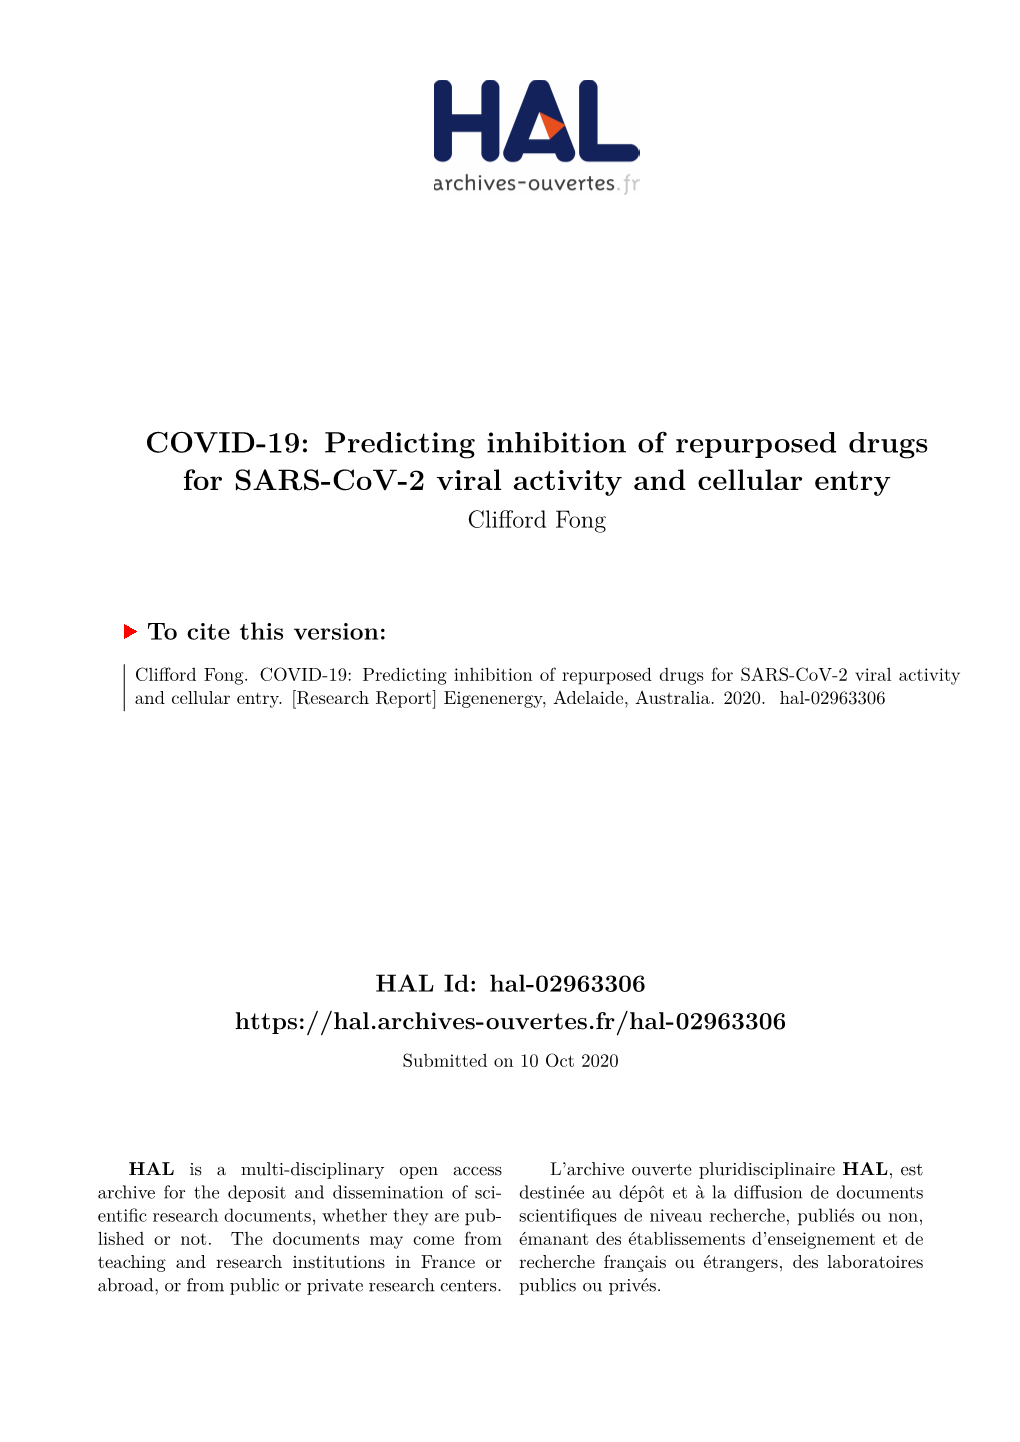 COVID-19: Predicting Inhibition of Repurposed Drugs for SARS-Cov-2 Viral Activity and Cellular Entry Clifford Fong